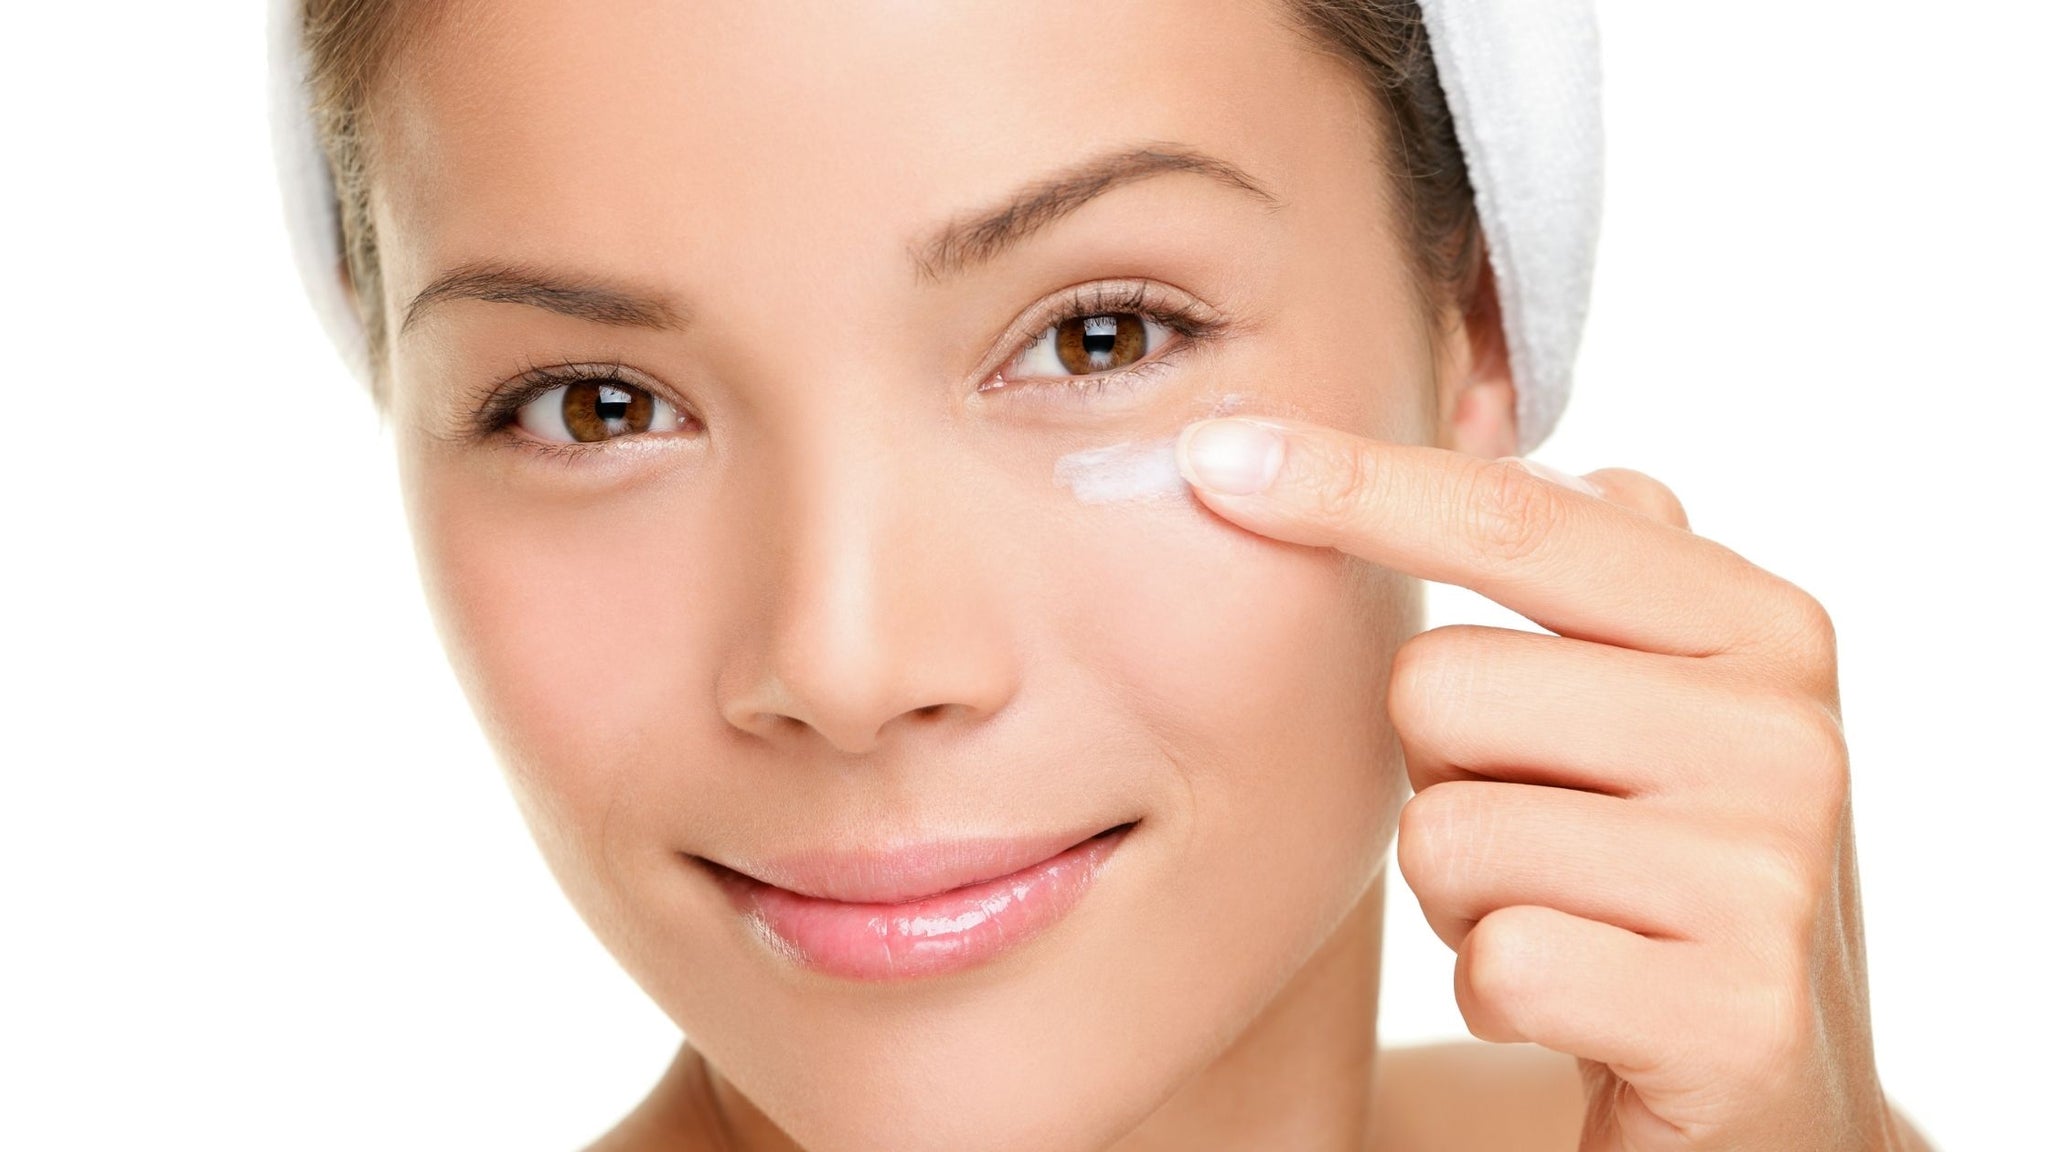 Wrinkles Under Eyes Distressing You? Here are 2 Incredible Ingredients that can Help You Get Rid of Them!